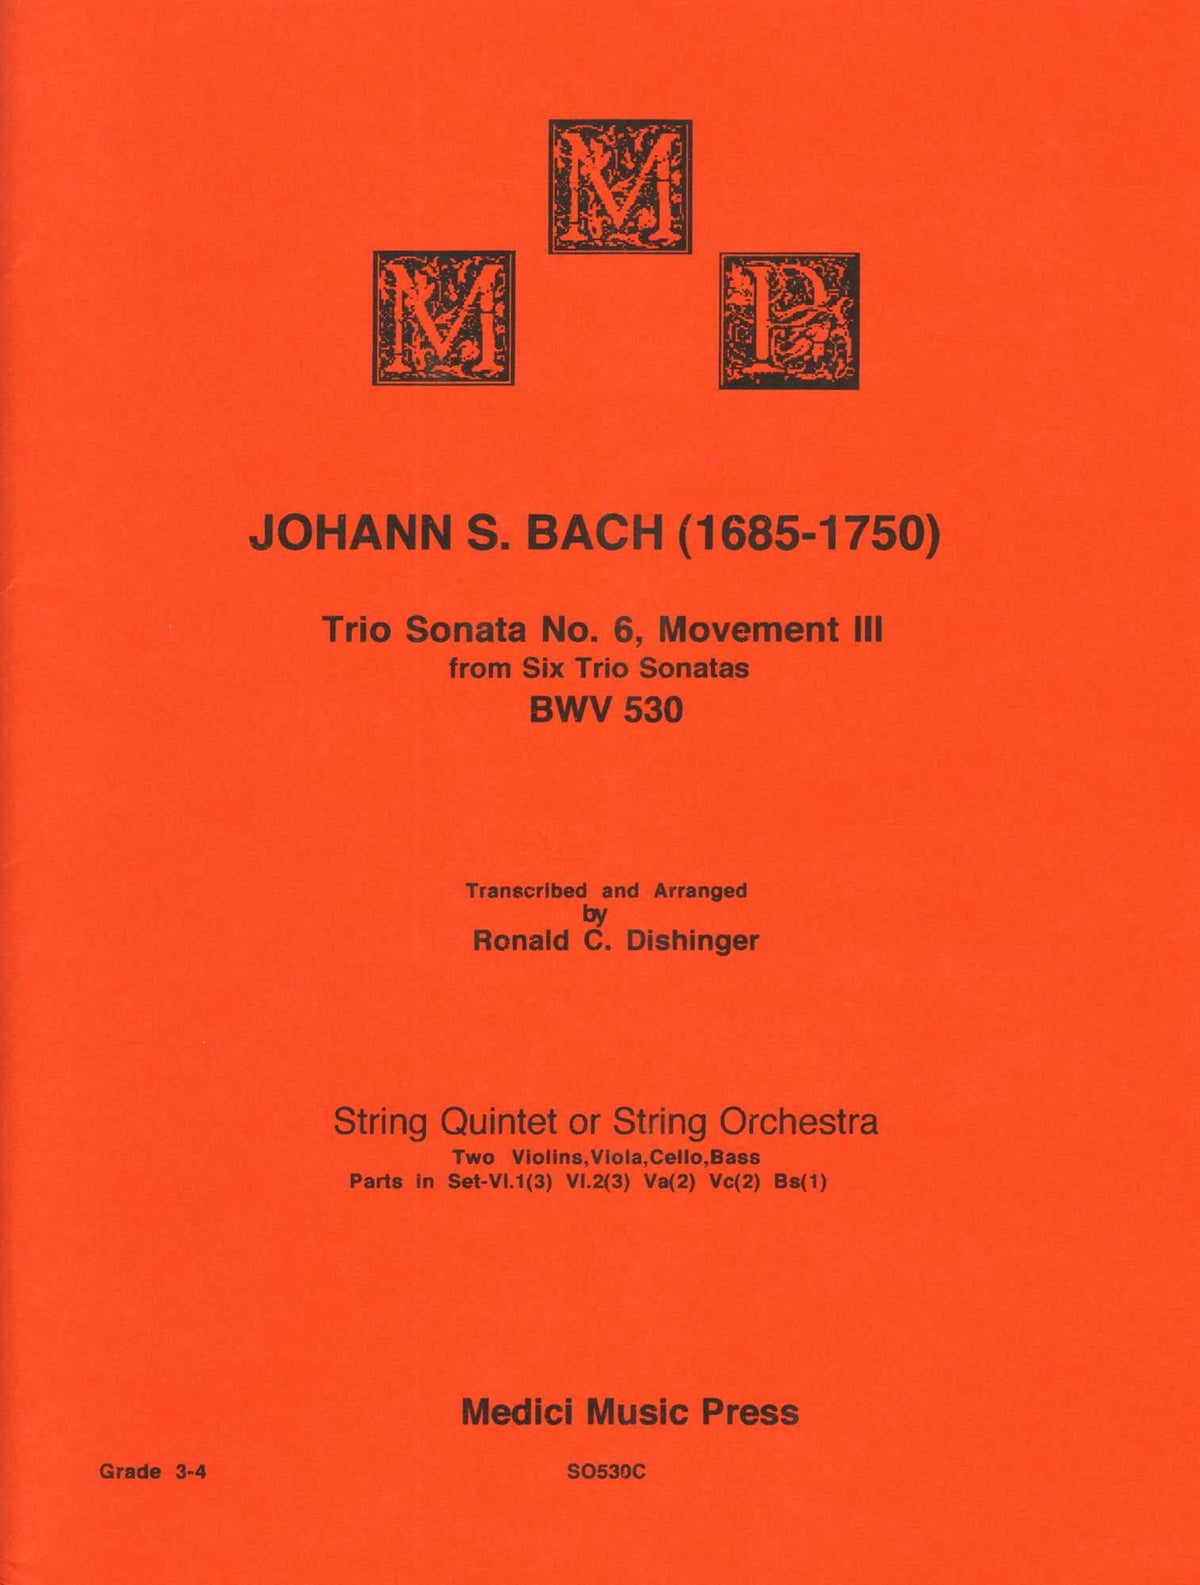 Bach, J.S. - Trio Sonata No. 6, Mvt. III, from BWV 530 - for String Quintet or Orchestra - transcribed by Dishinger - Medici Music Press